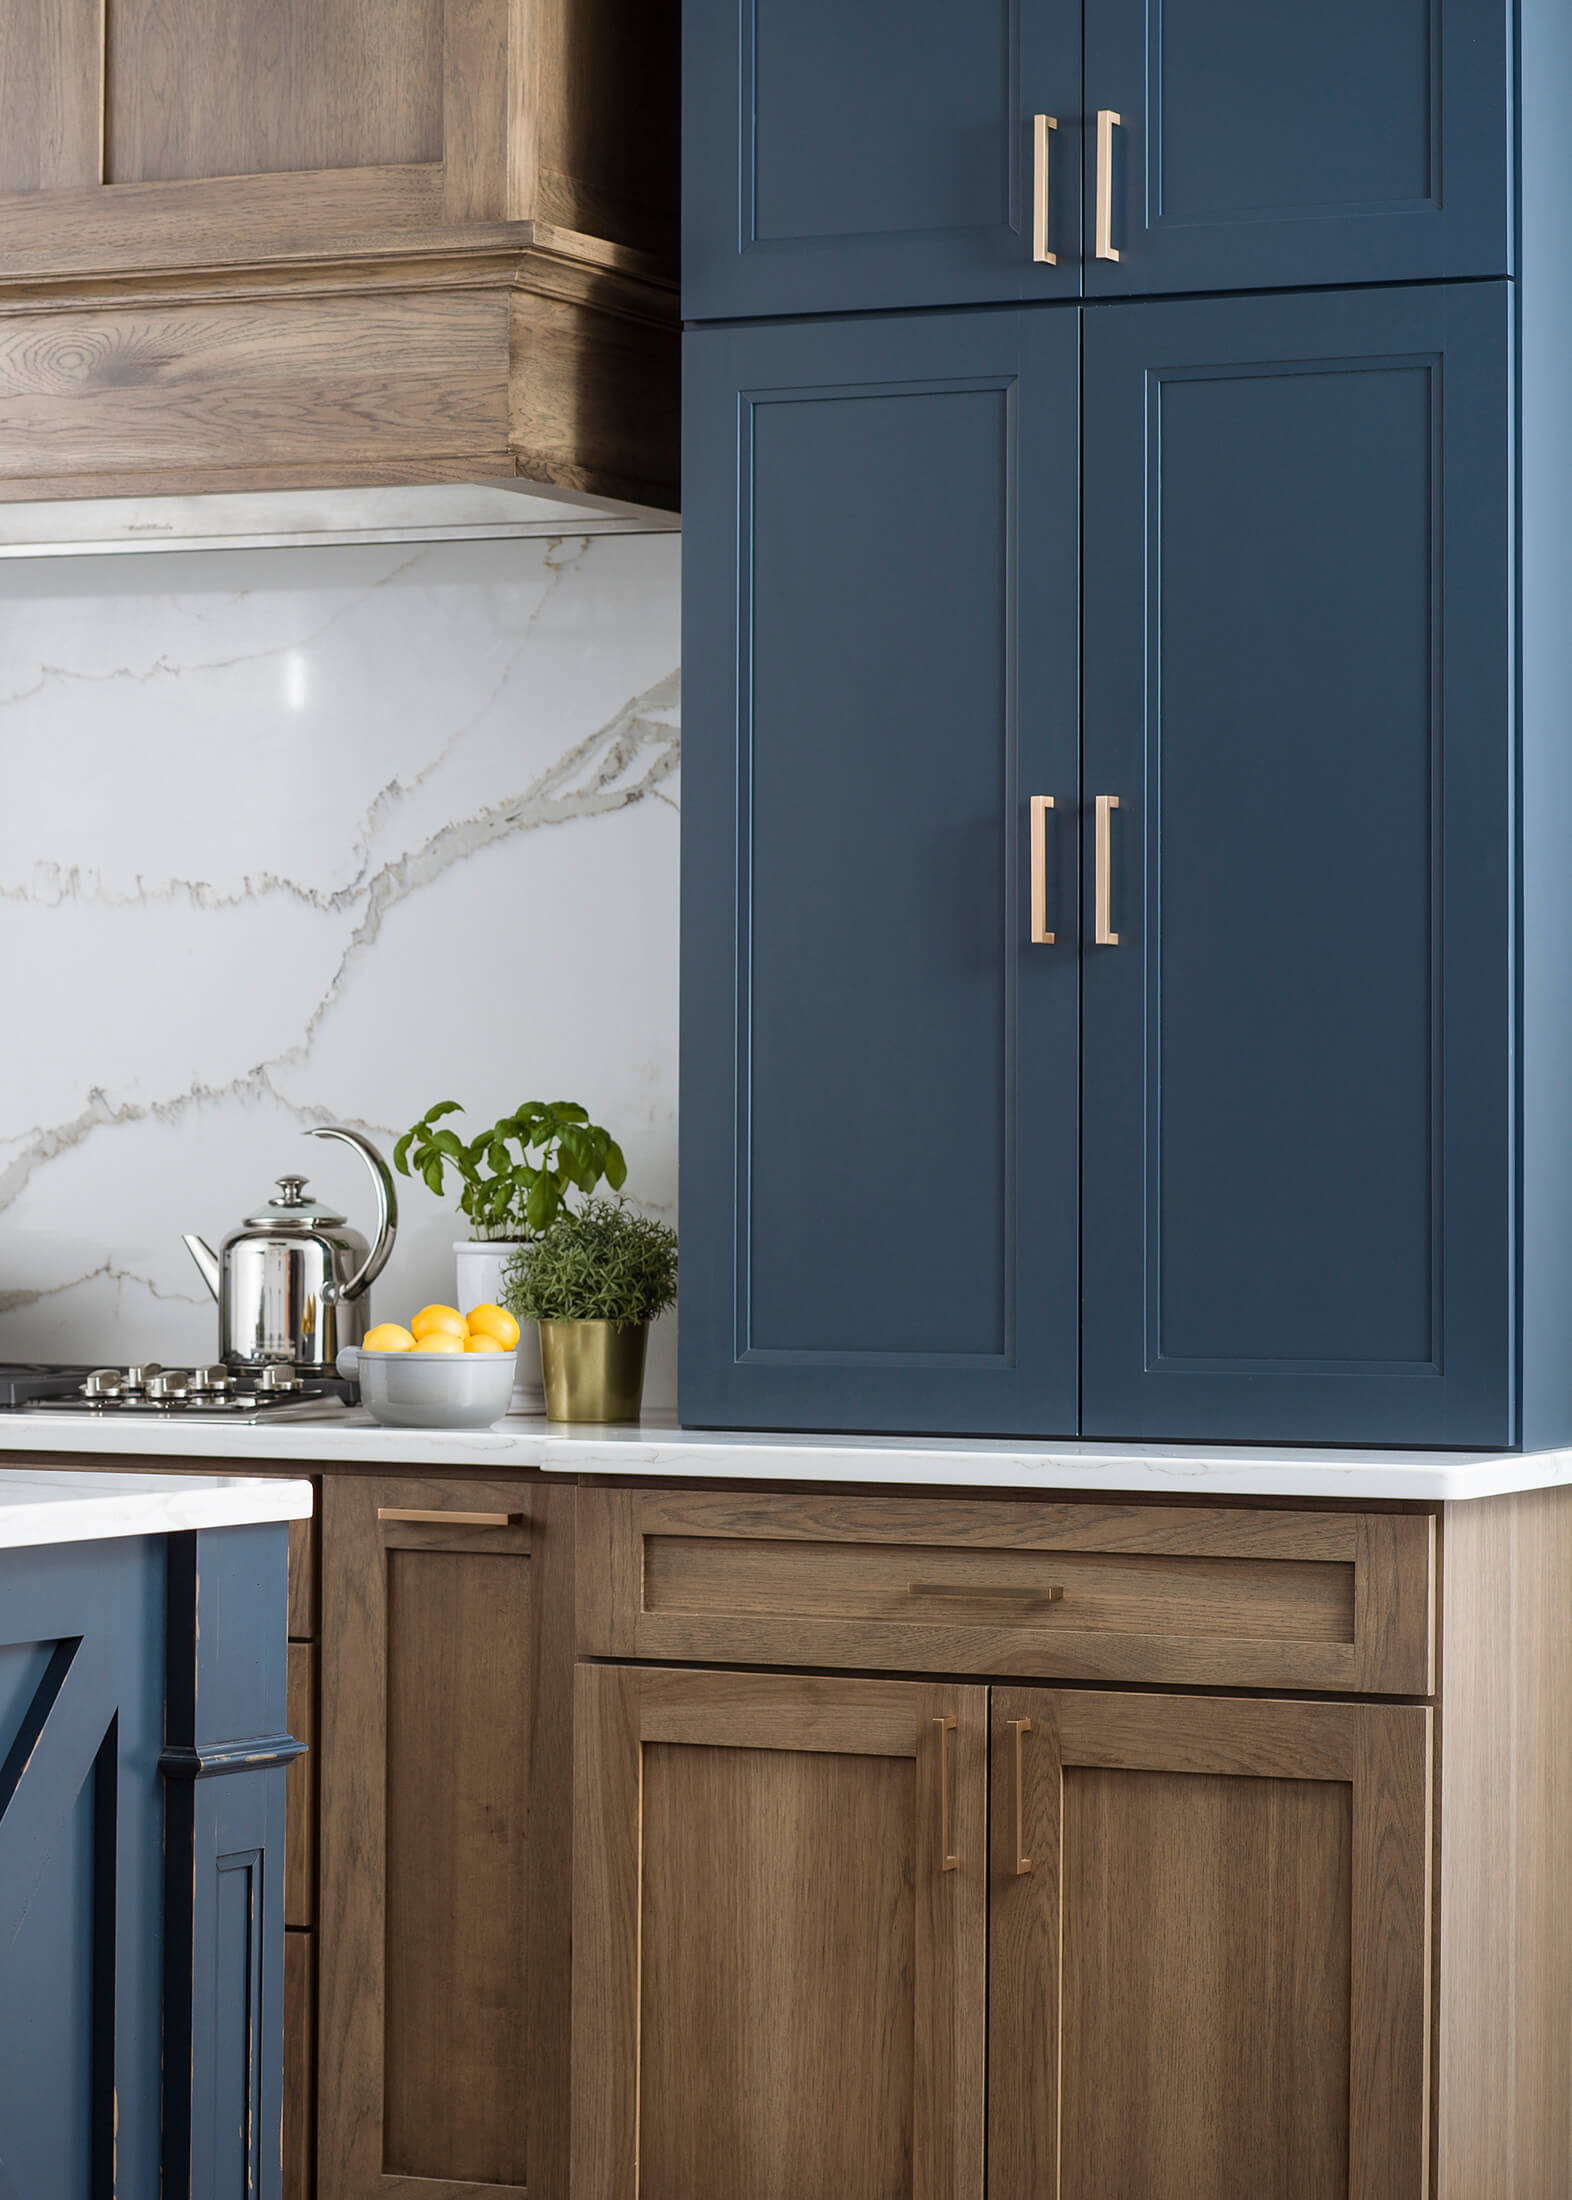 A navy blue and light stained hickory kitchen with a Modern Farmhouse style. Featuring Dura Supreme Cabinetry ins Sherwin-William's Gale Force blue paint color.